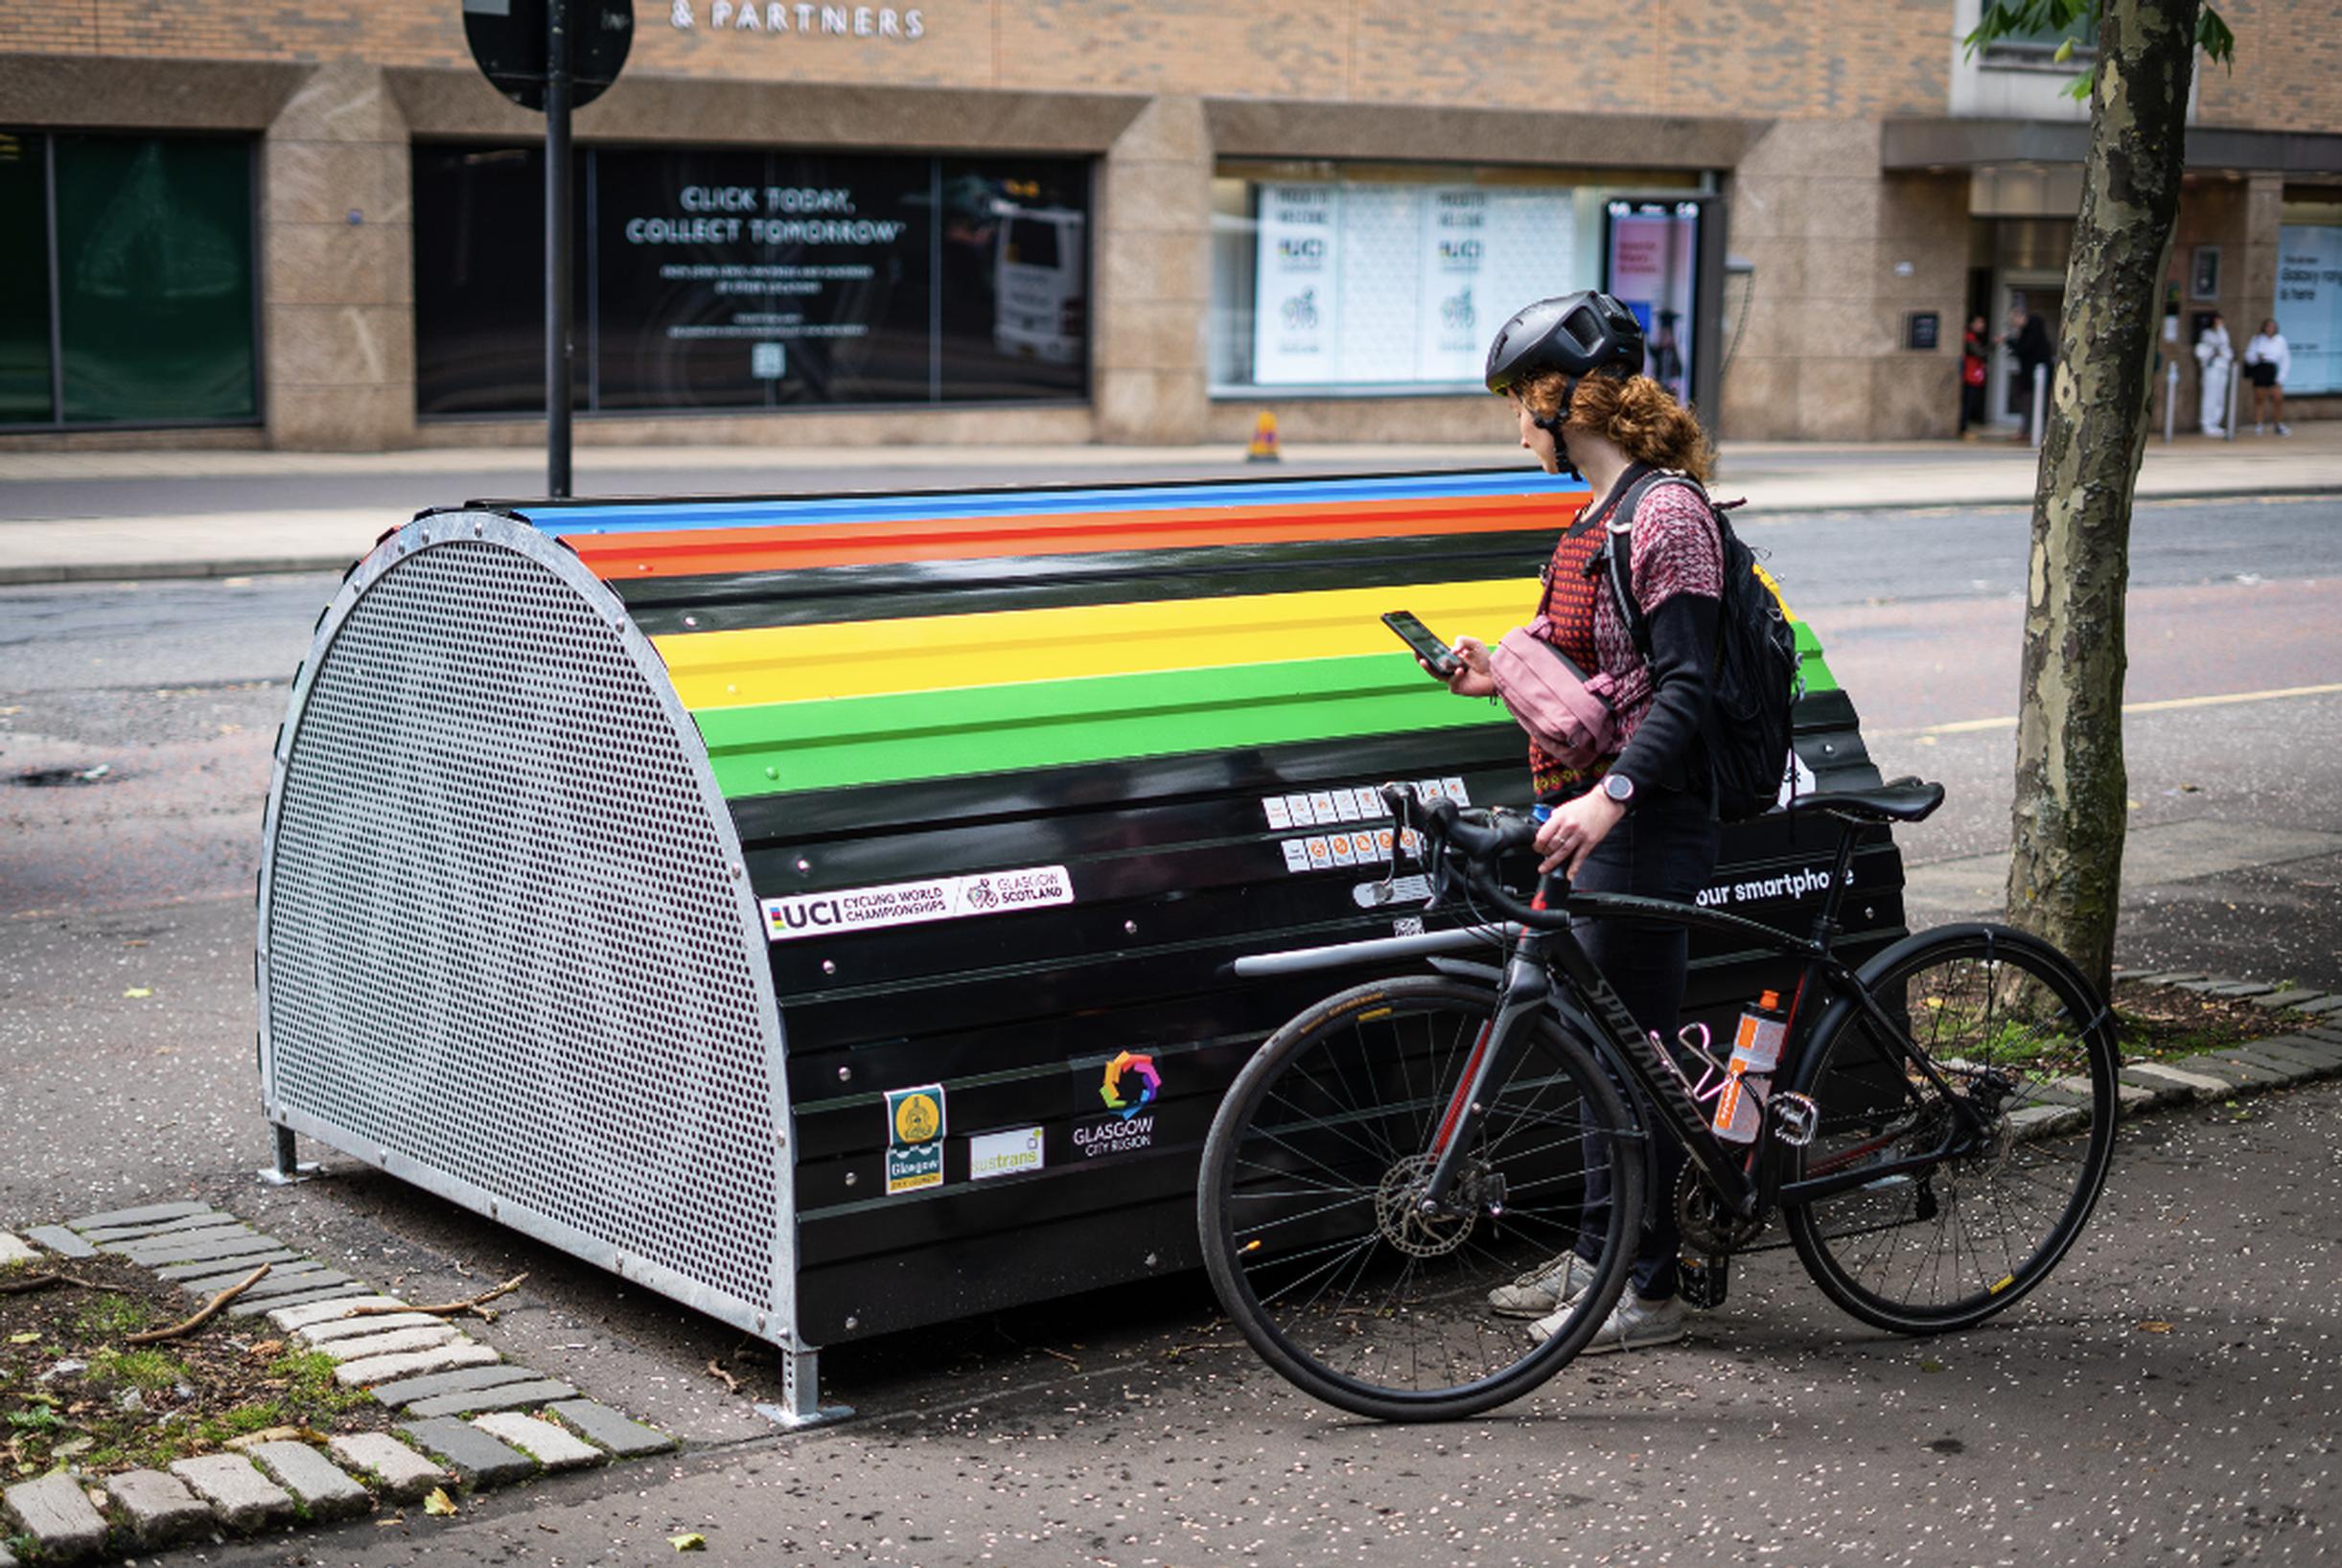 Bikehangars rolled out in central Glasgow